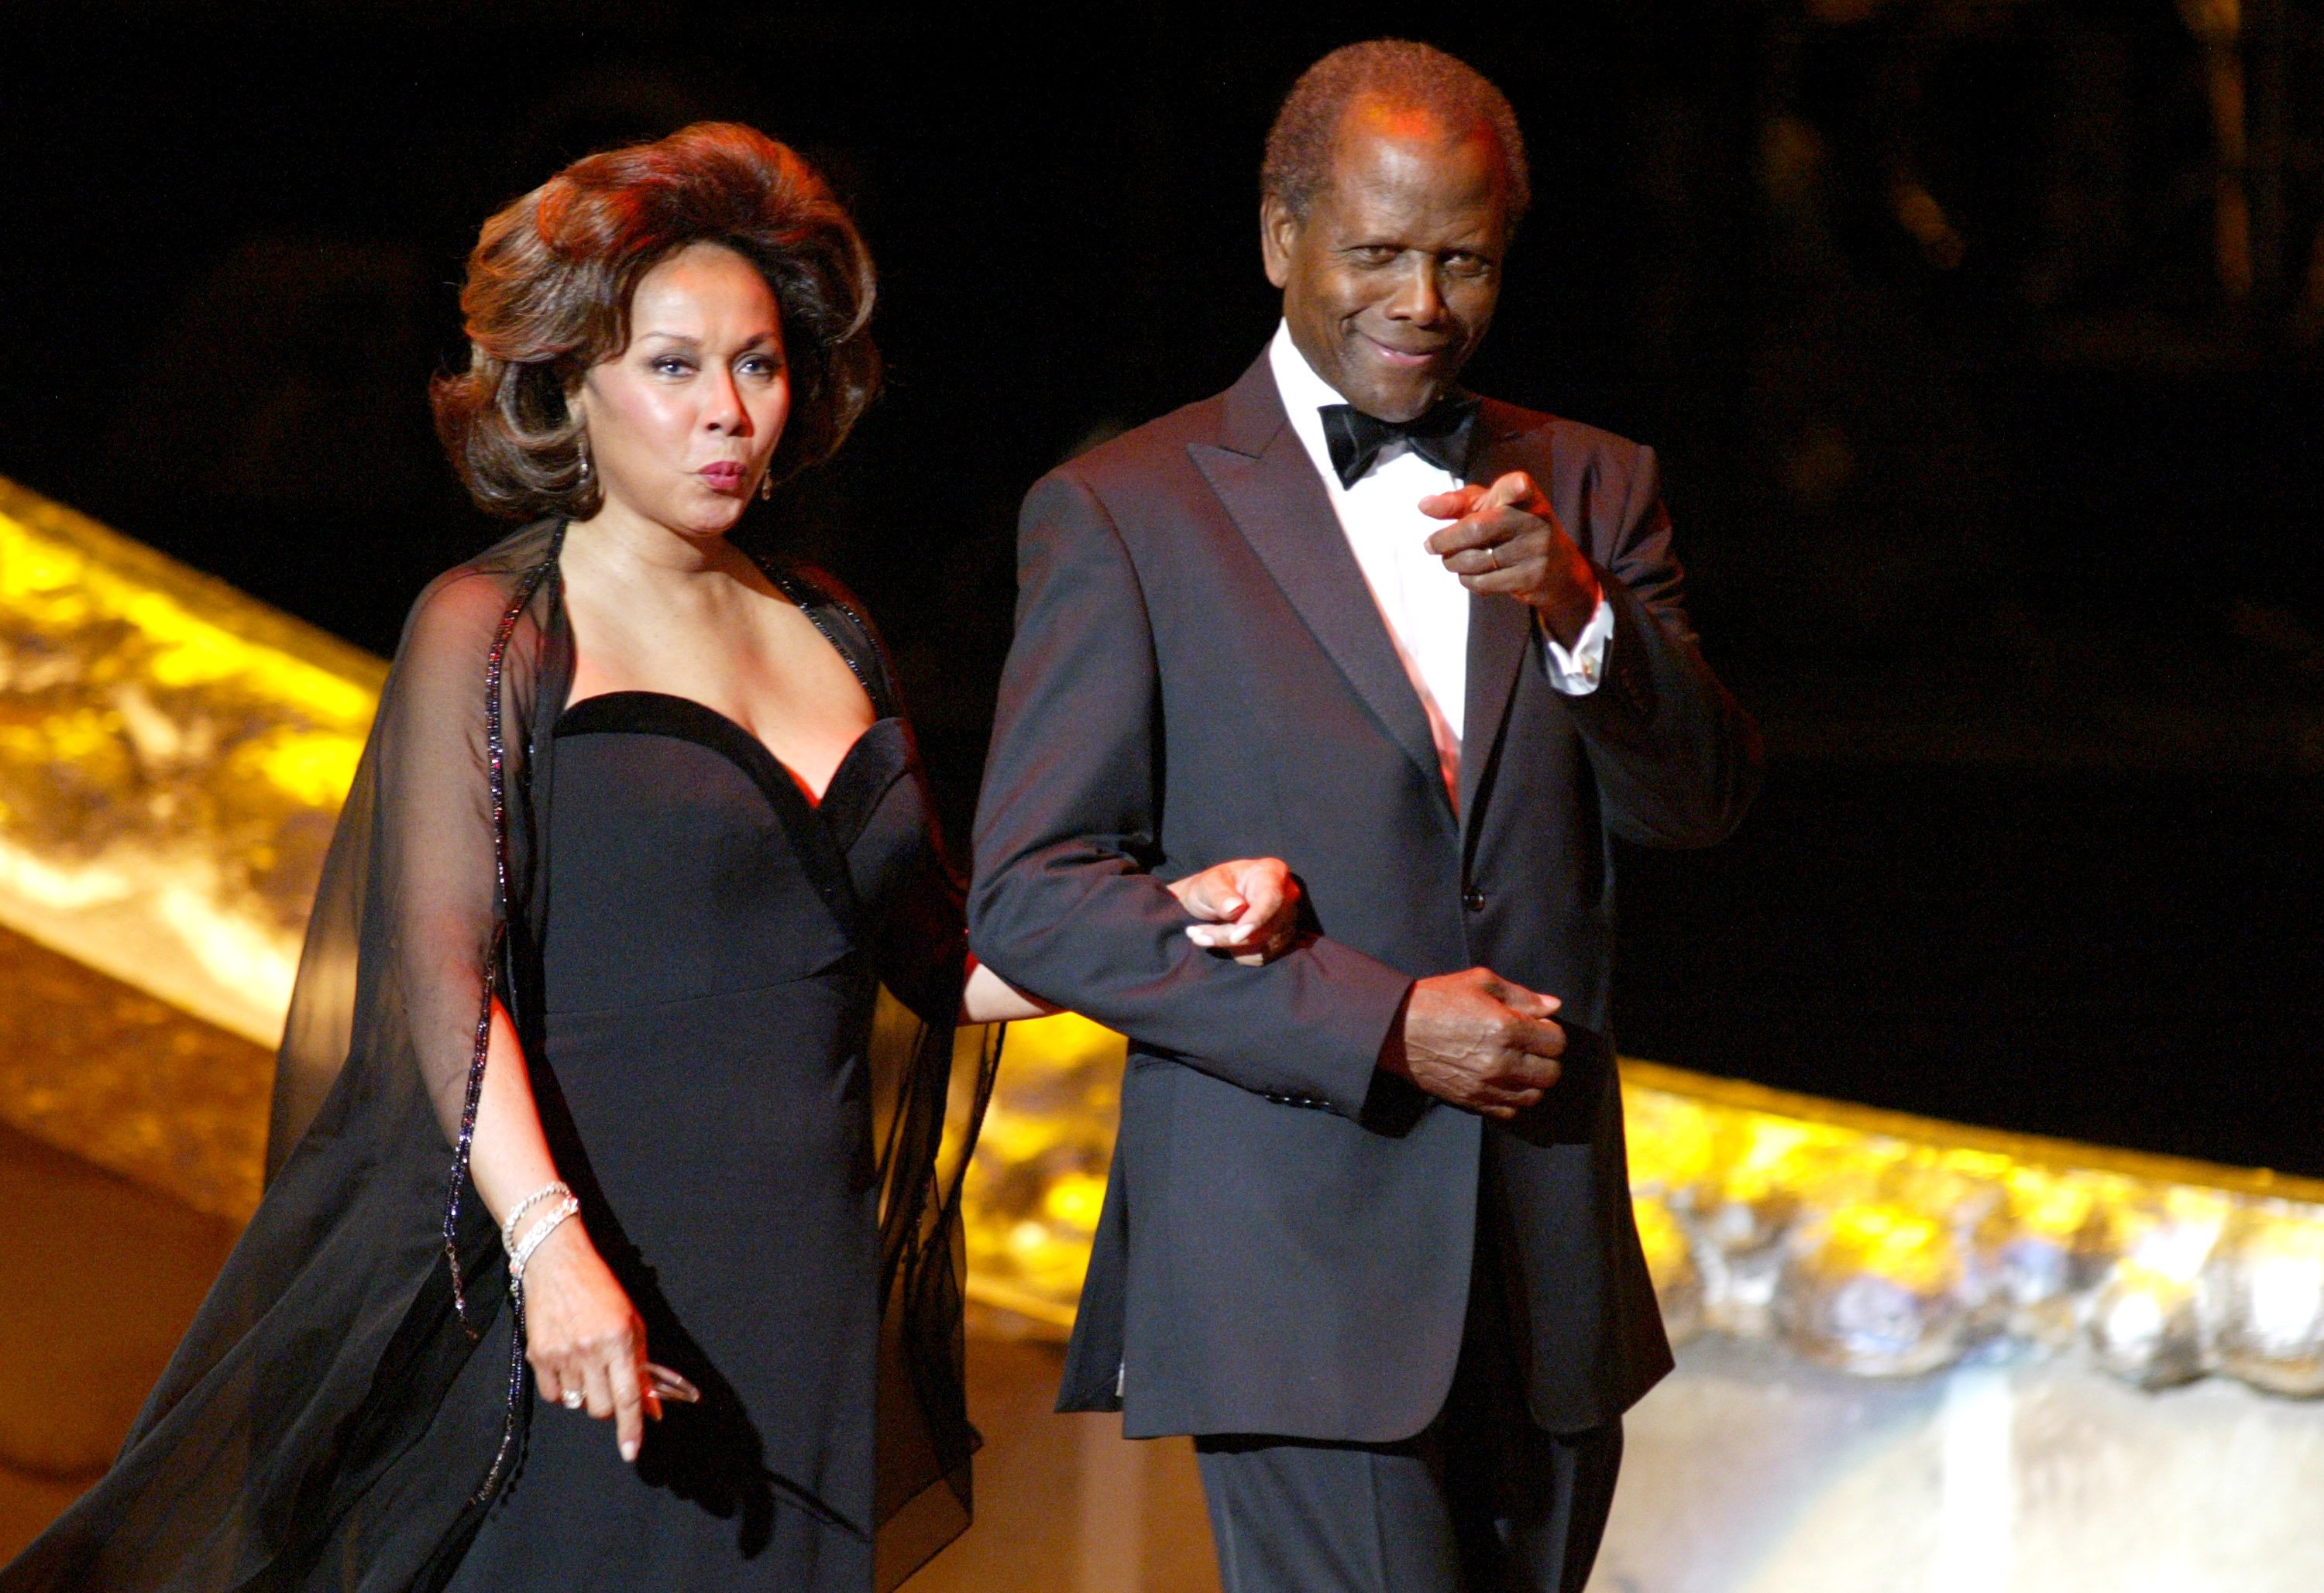 Diahann Carroll and Sidney Poitier at the 36th Annual NAACP Image Awards on March 19, 2005. | Photo: Getty Images